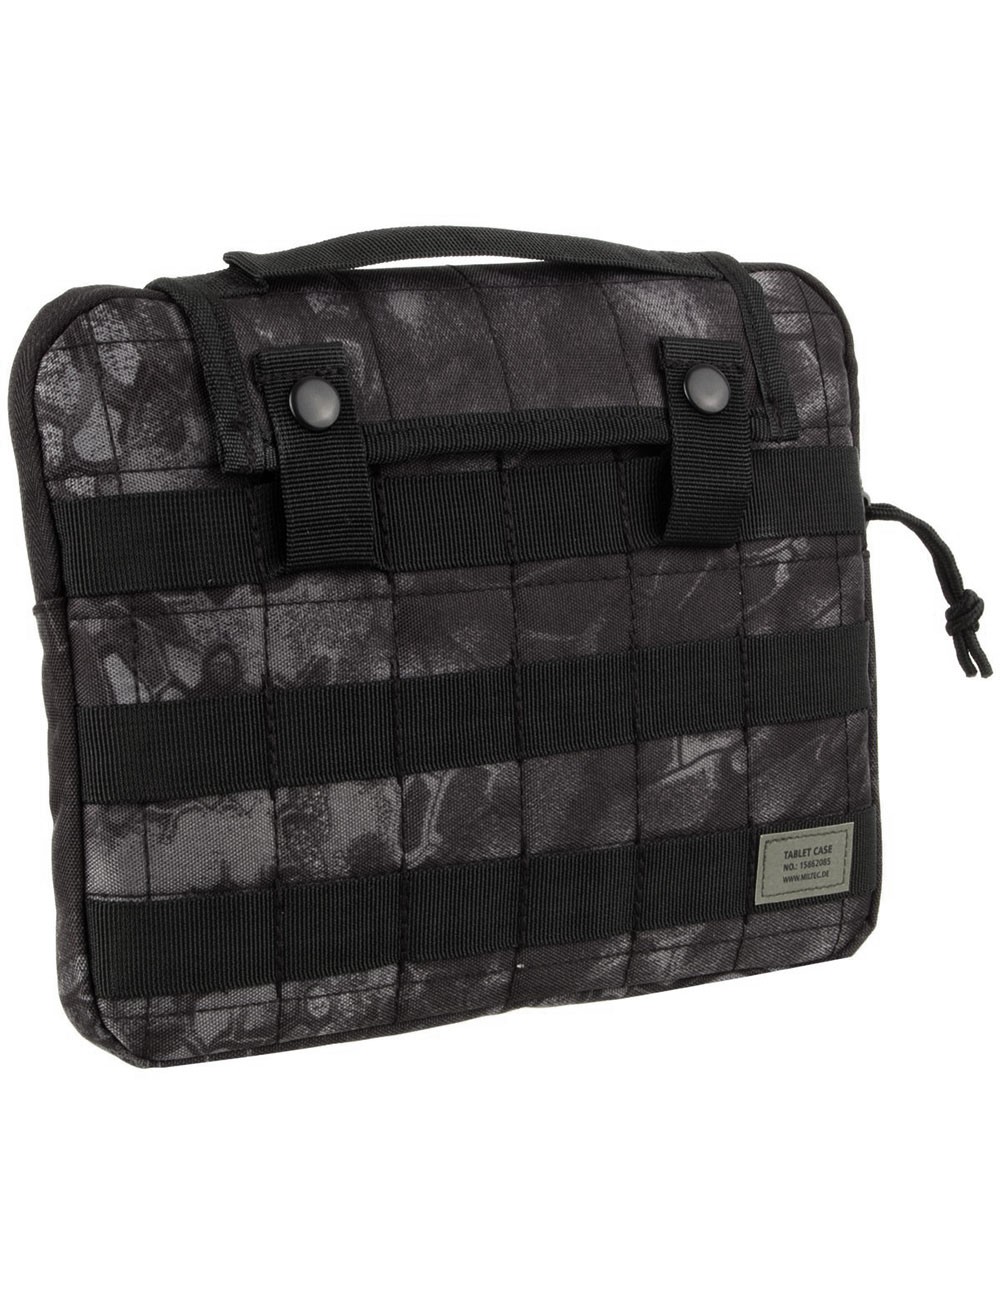 Miltec 15862085 Tactical Molle Case For Tablet 12 inch Mandra Night